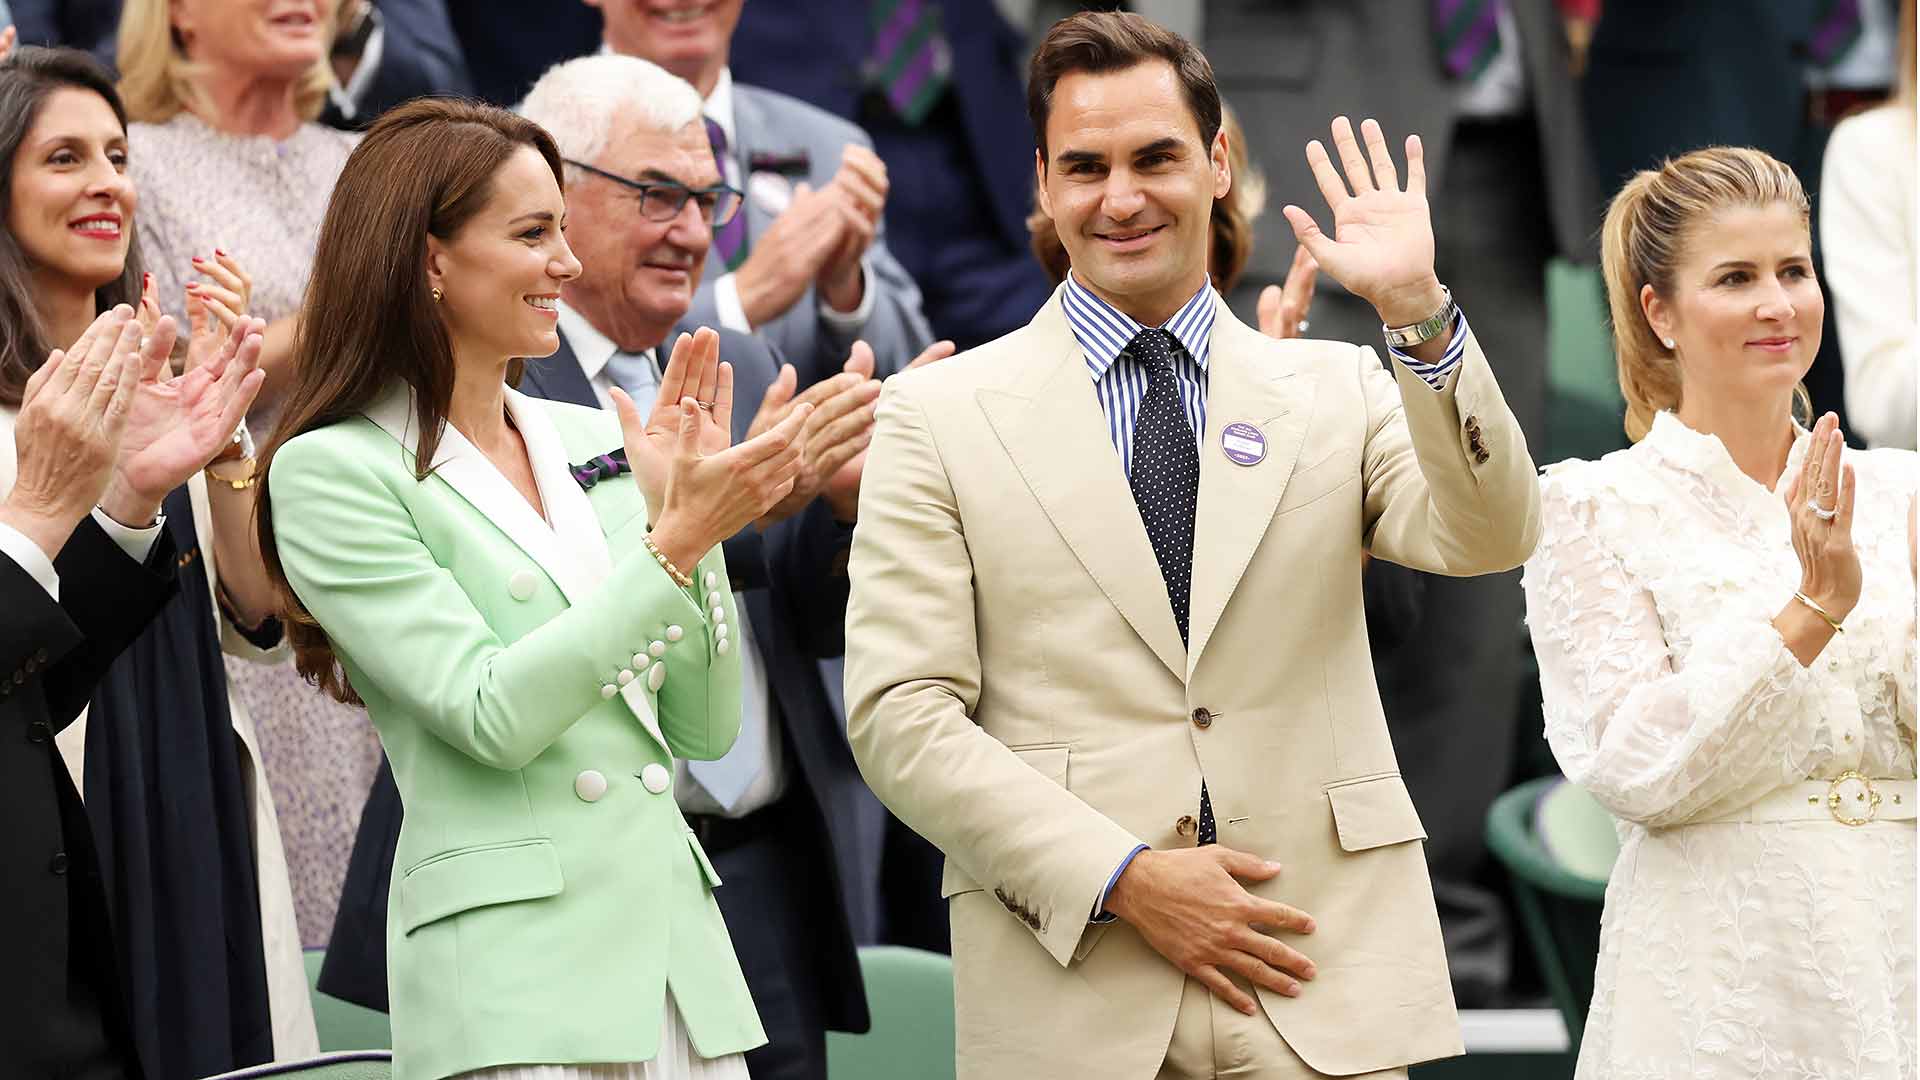 Roger Federer Returns To Wimbledon, Chats With Cat